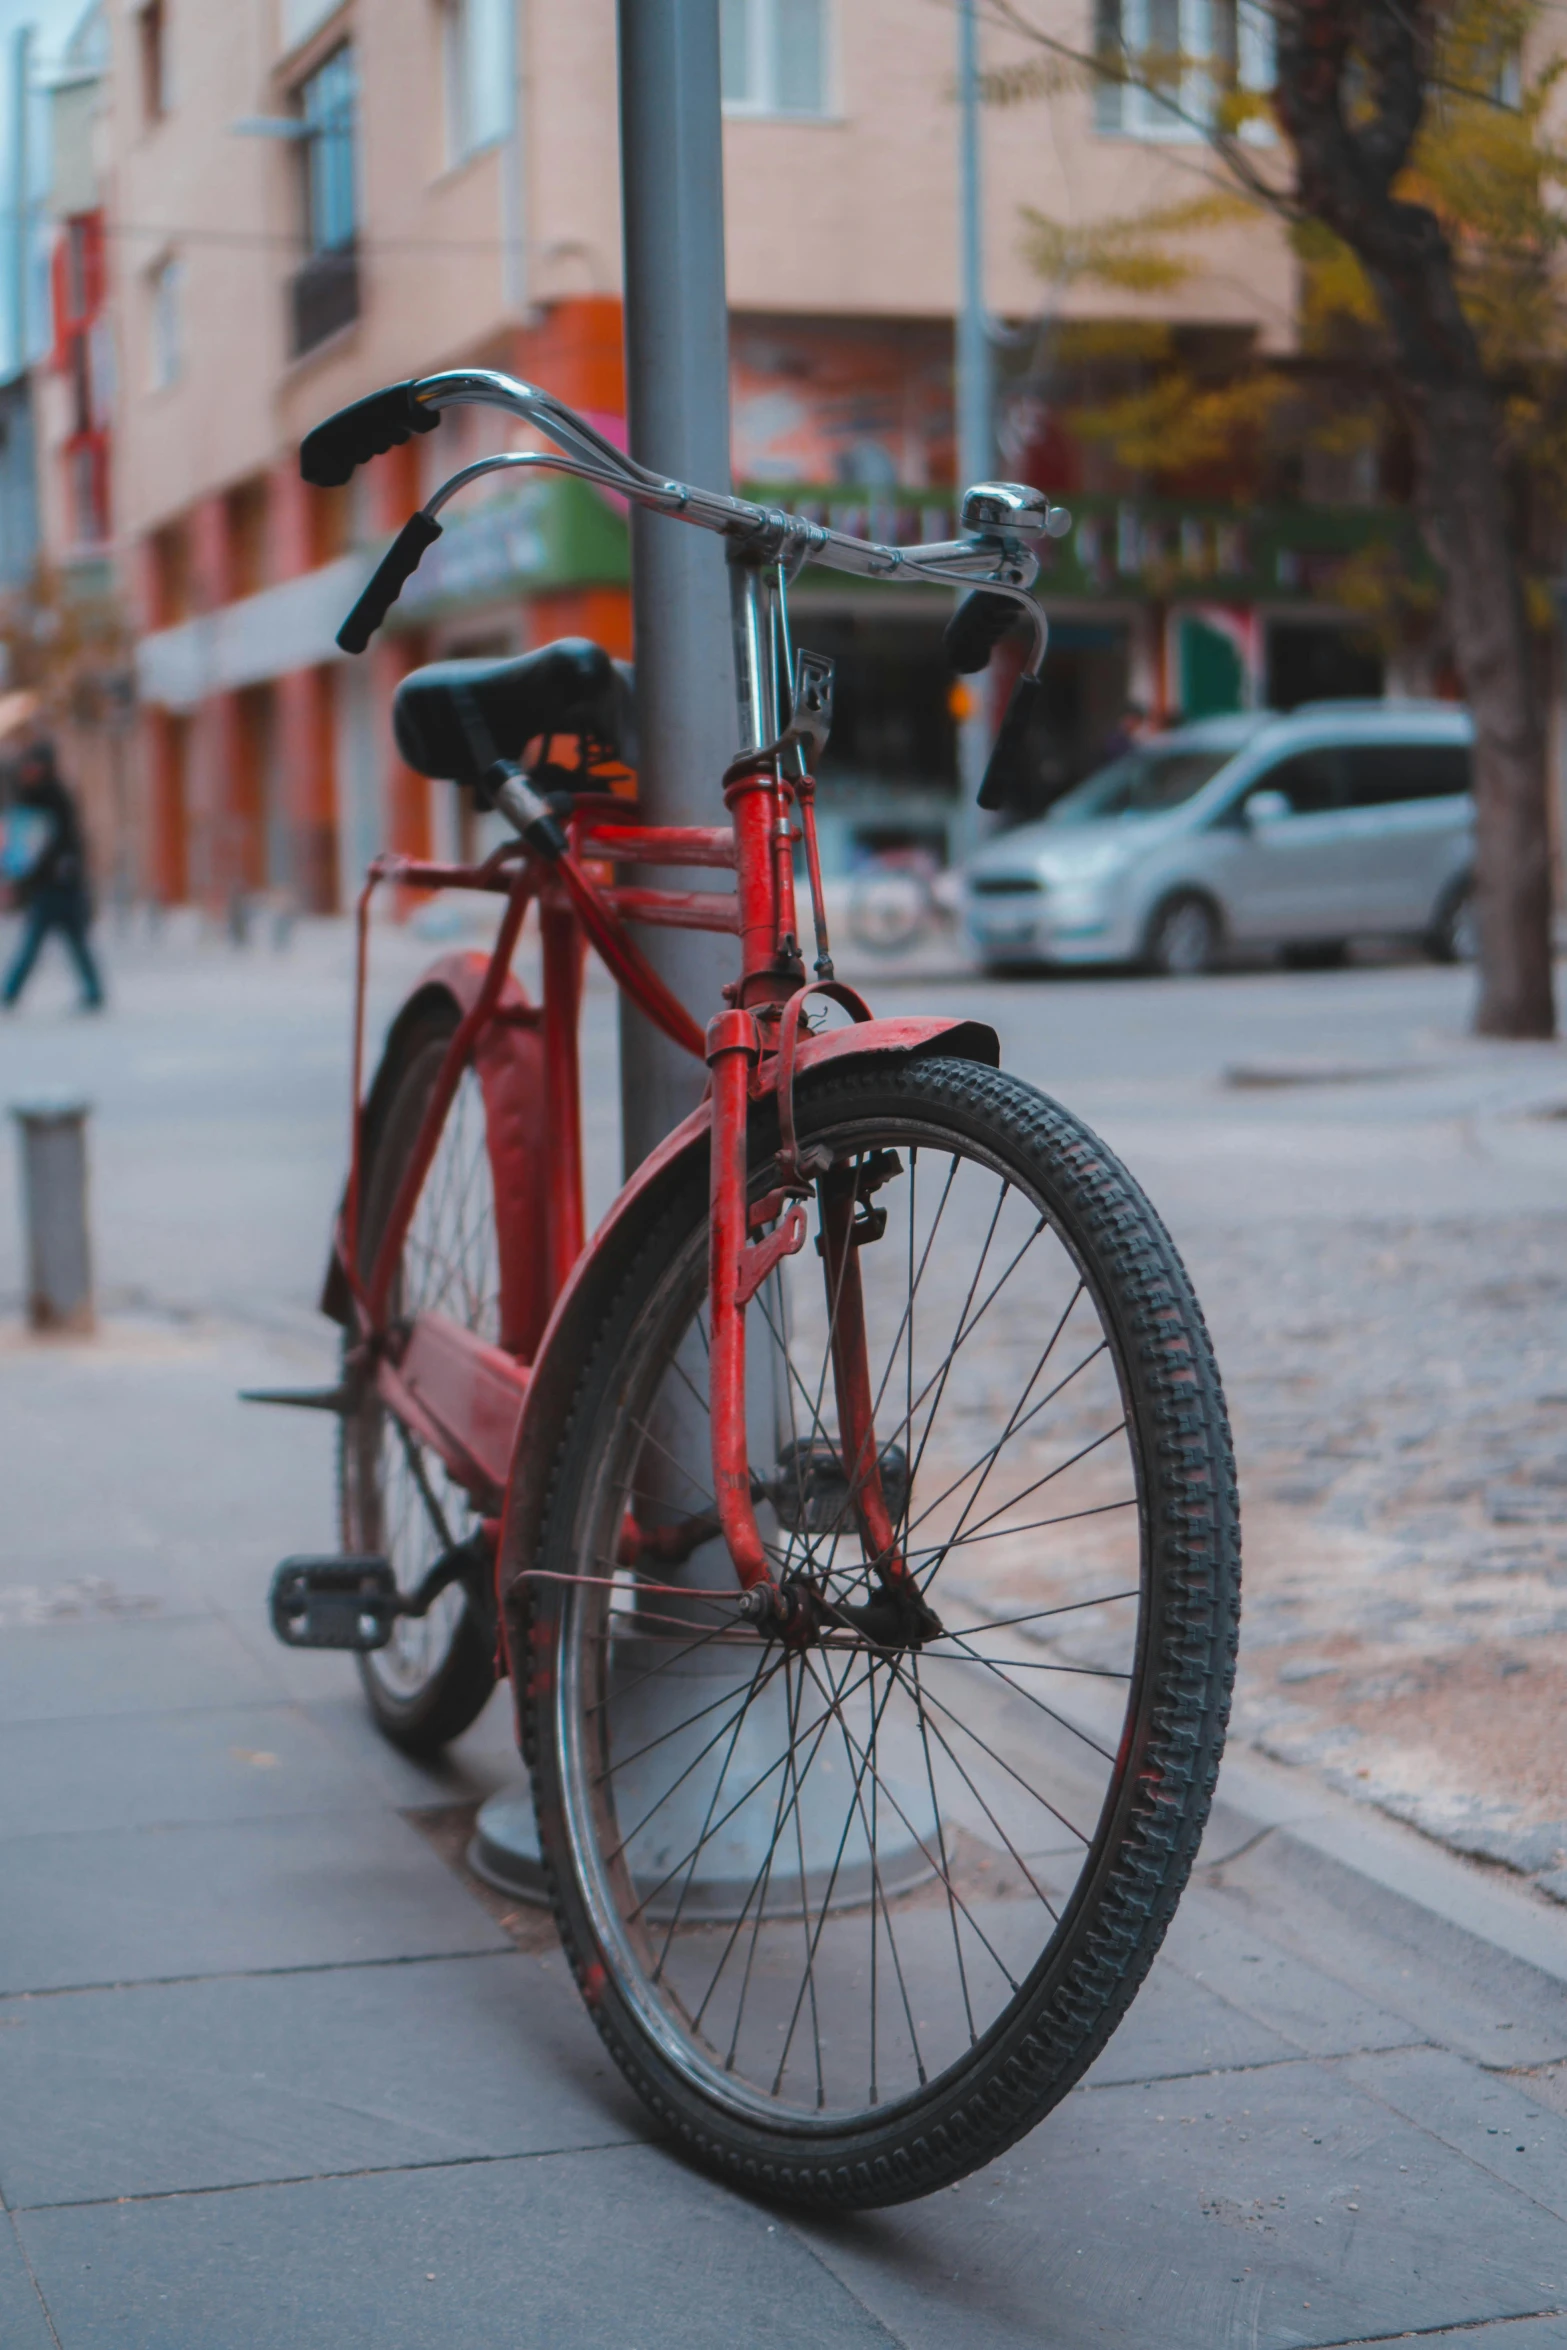 a red bike parked on the side of a street, on a street, up close, still photograph, rectangle